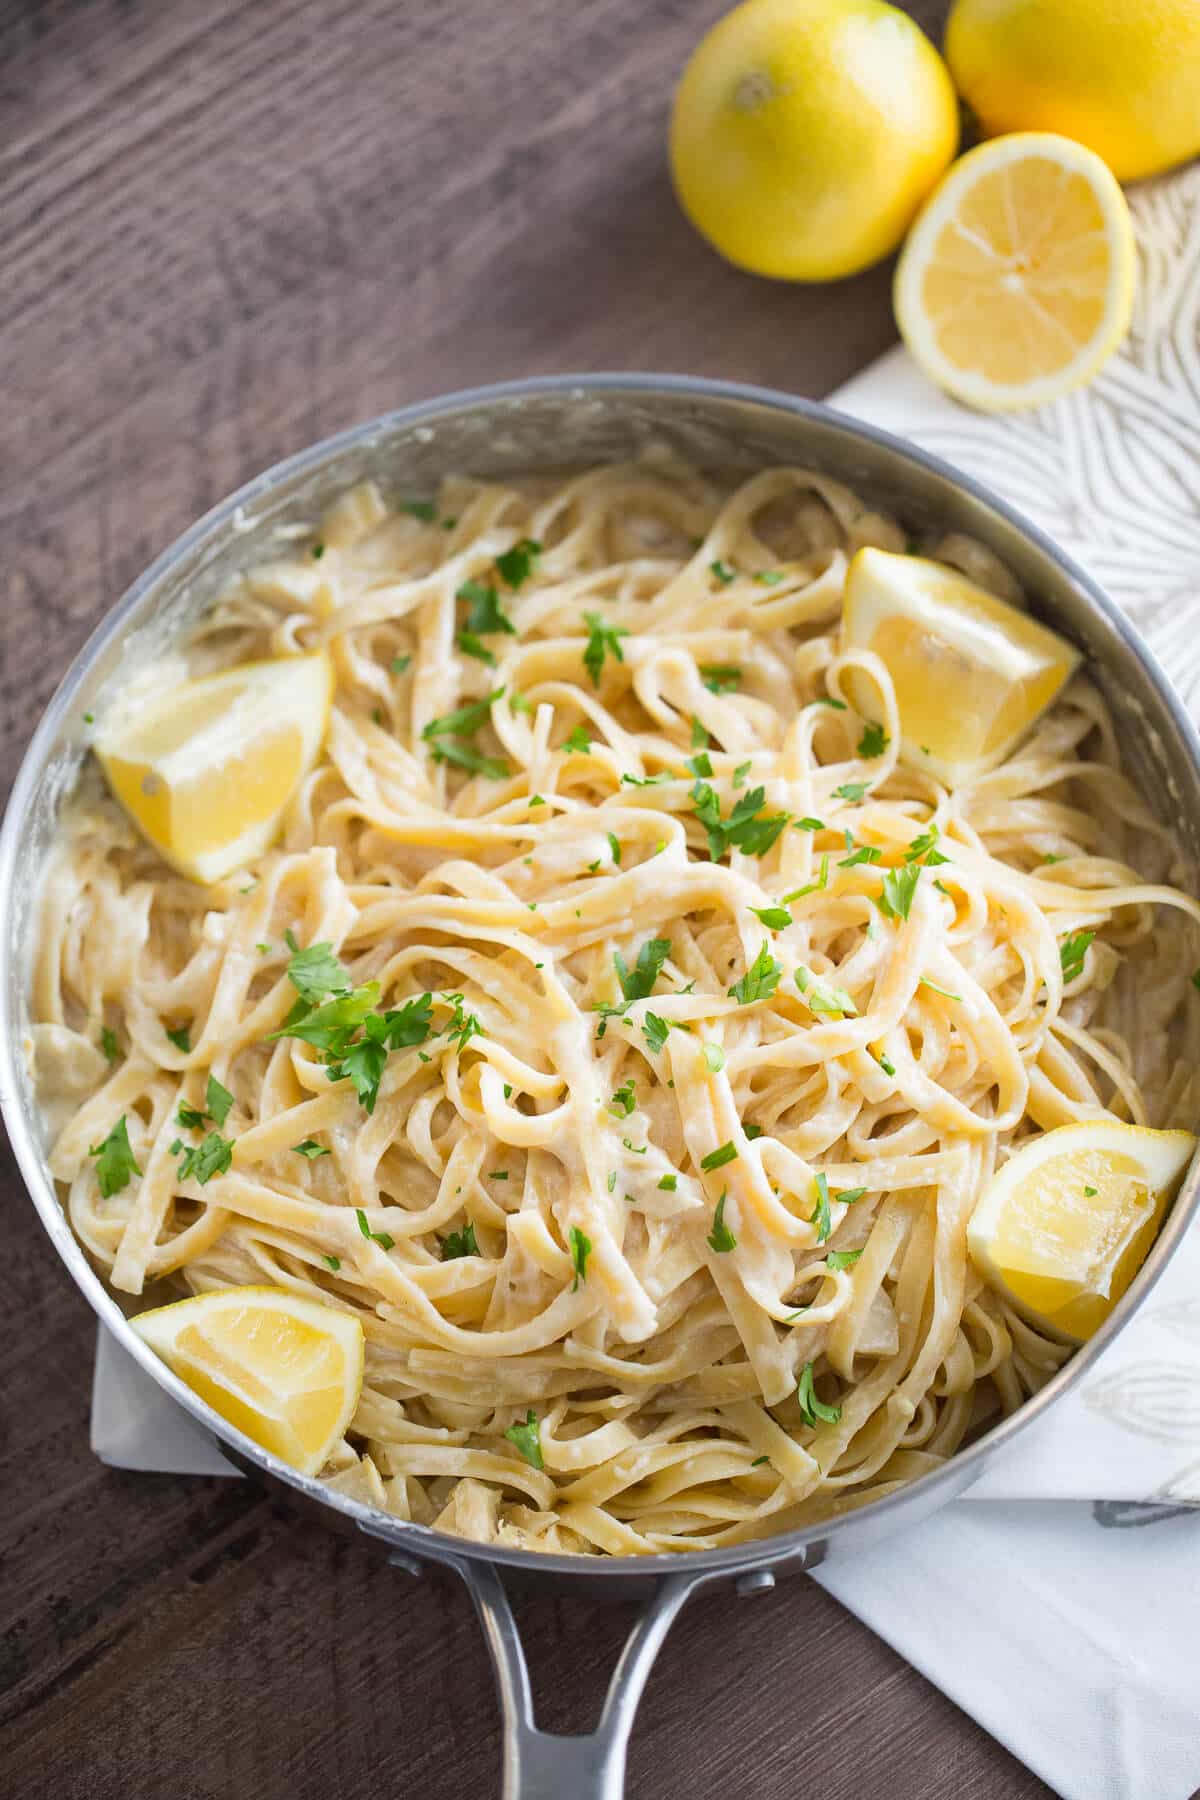 You are going to love this easy Fettuccine Alfredo recipe! The sauce is light, creamy with a hint of lemon zest!